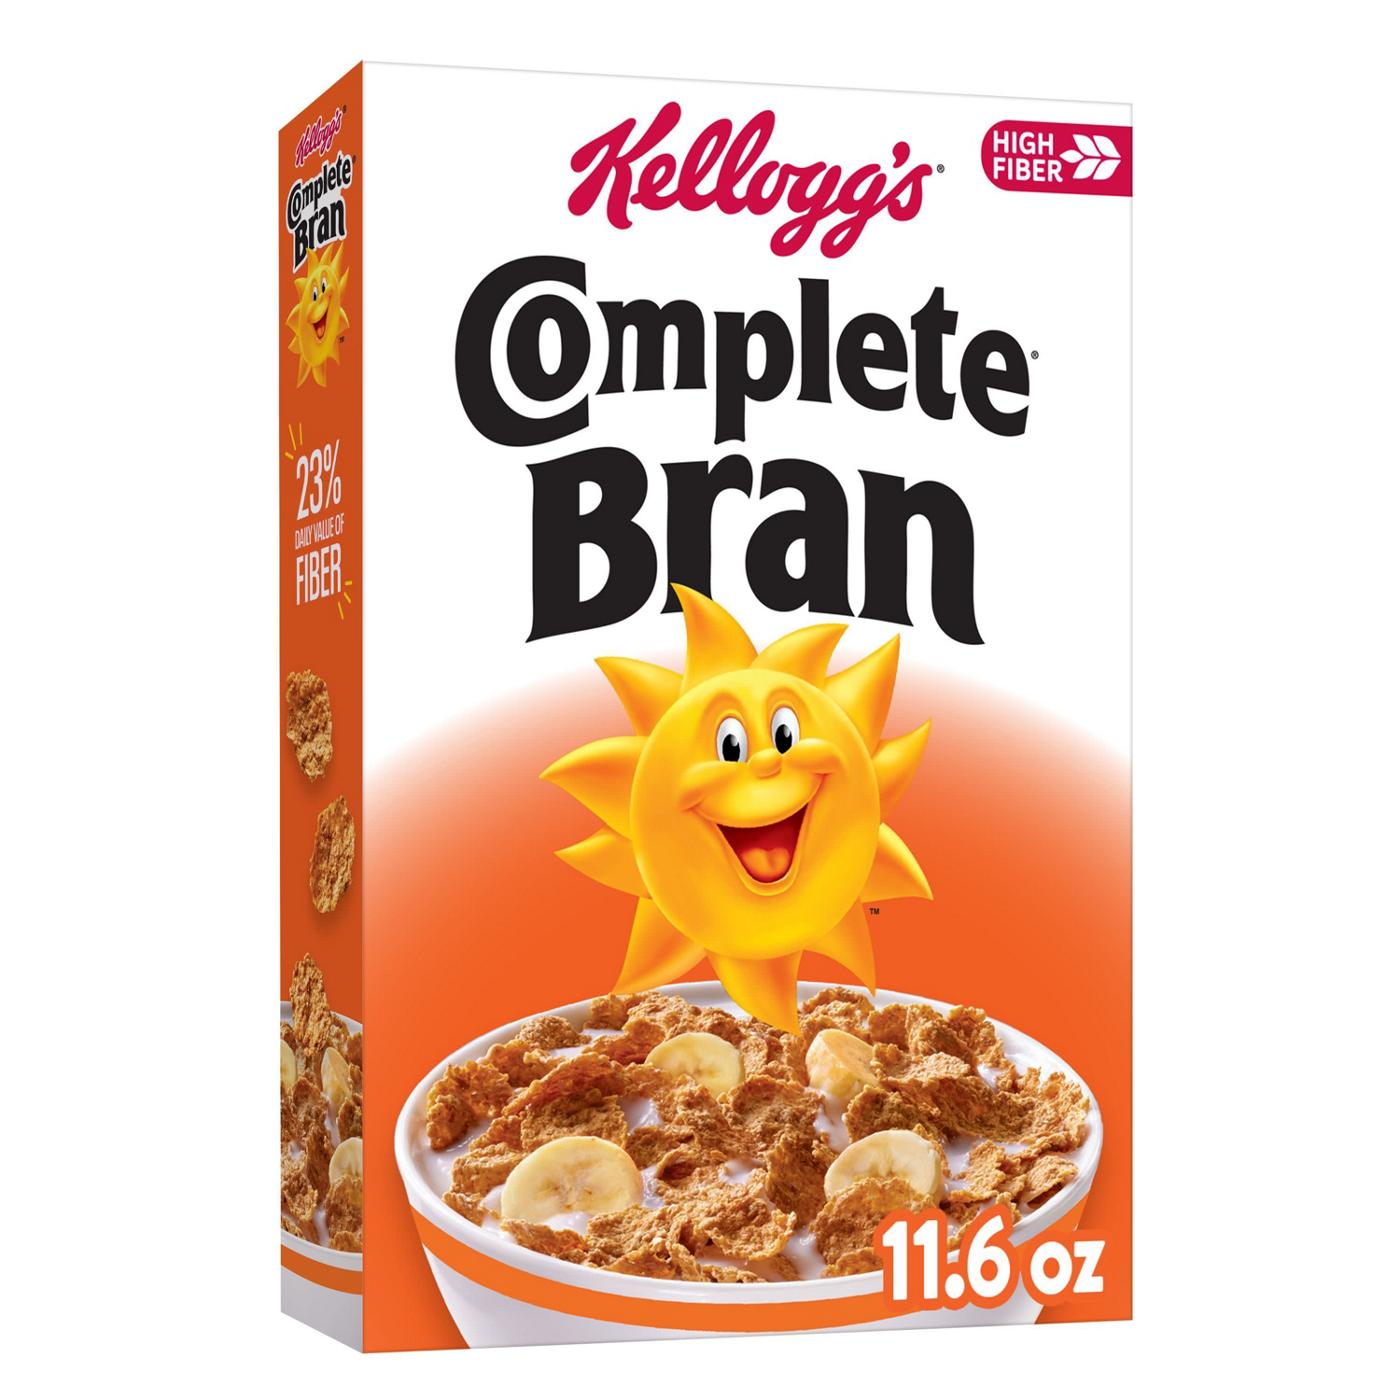 Kellogg's Complete Bran Cereal; image 1 of 5